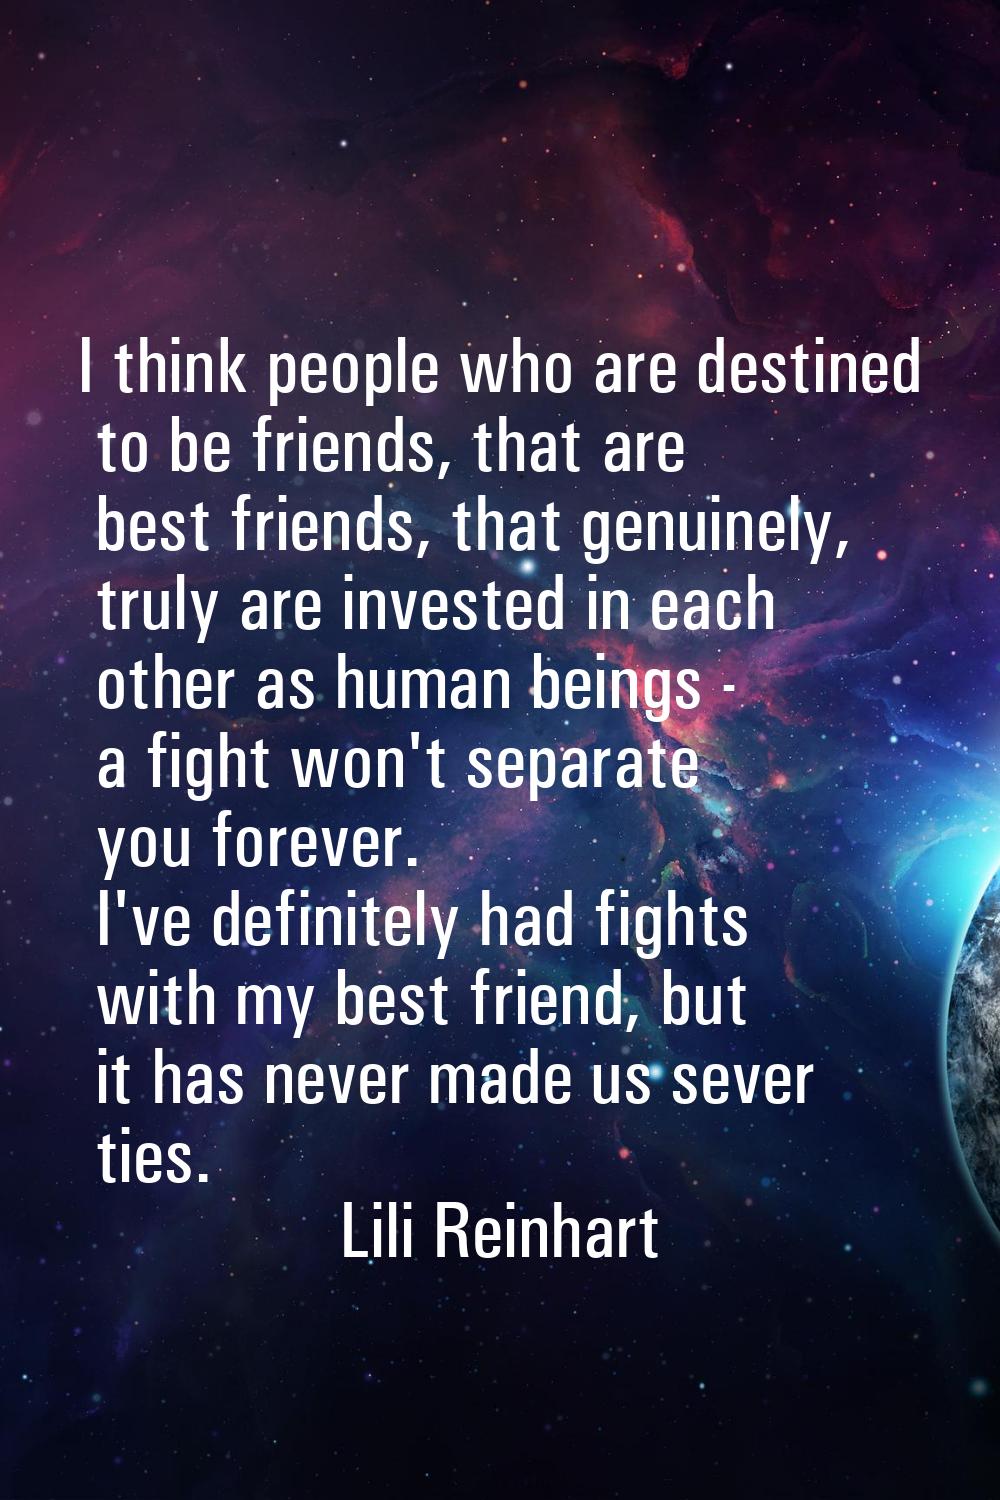 I think people who are destined to be friends, that are best friends, that genuinely, truly are inv